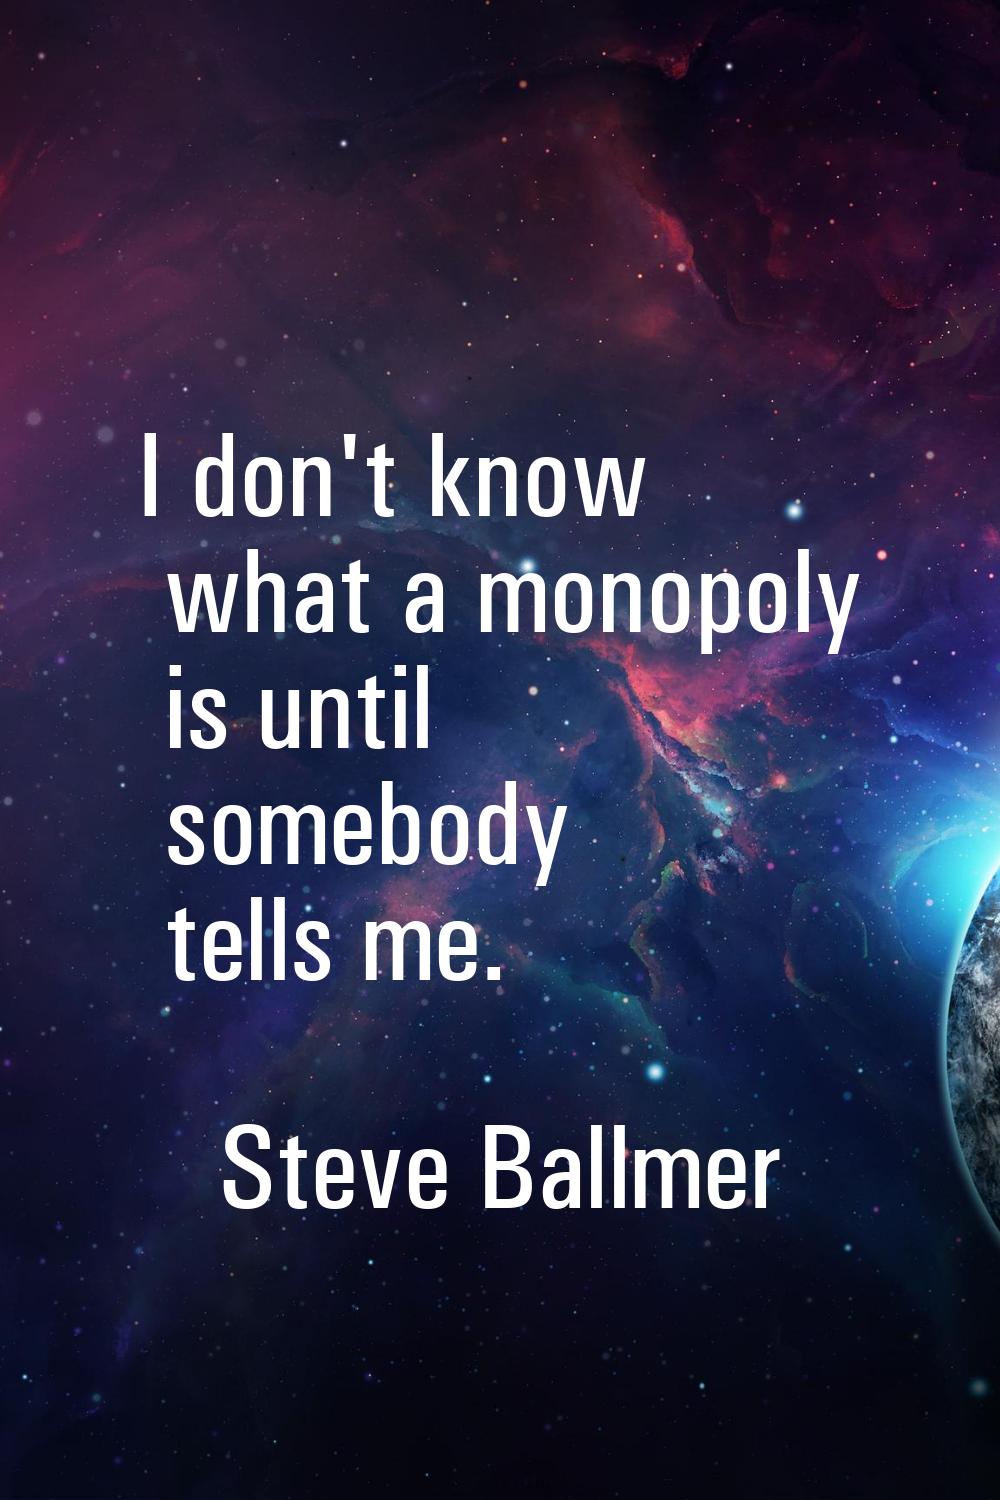 I don't know what a monopoly is until somebody tells me.